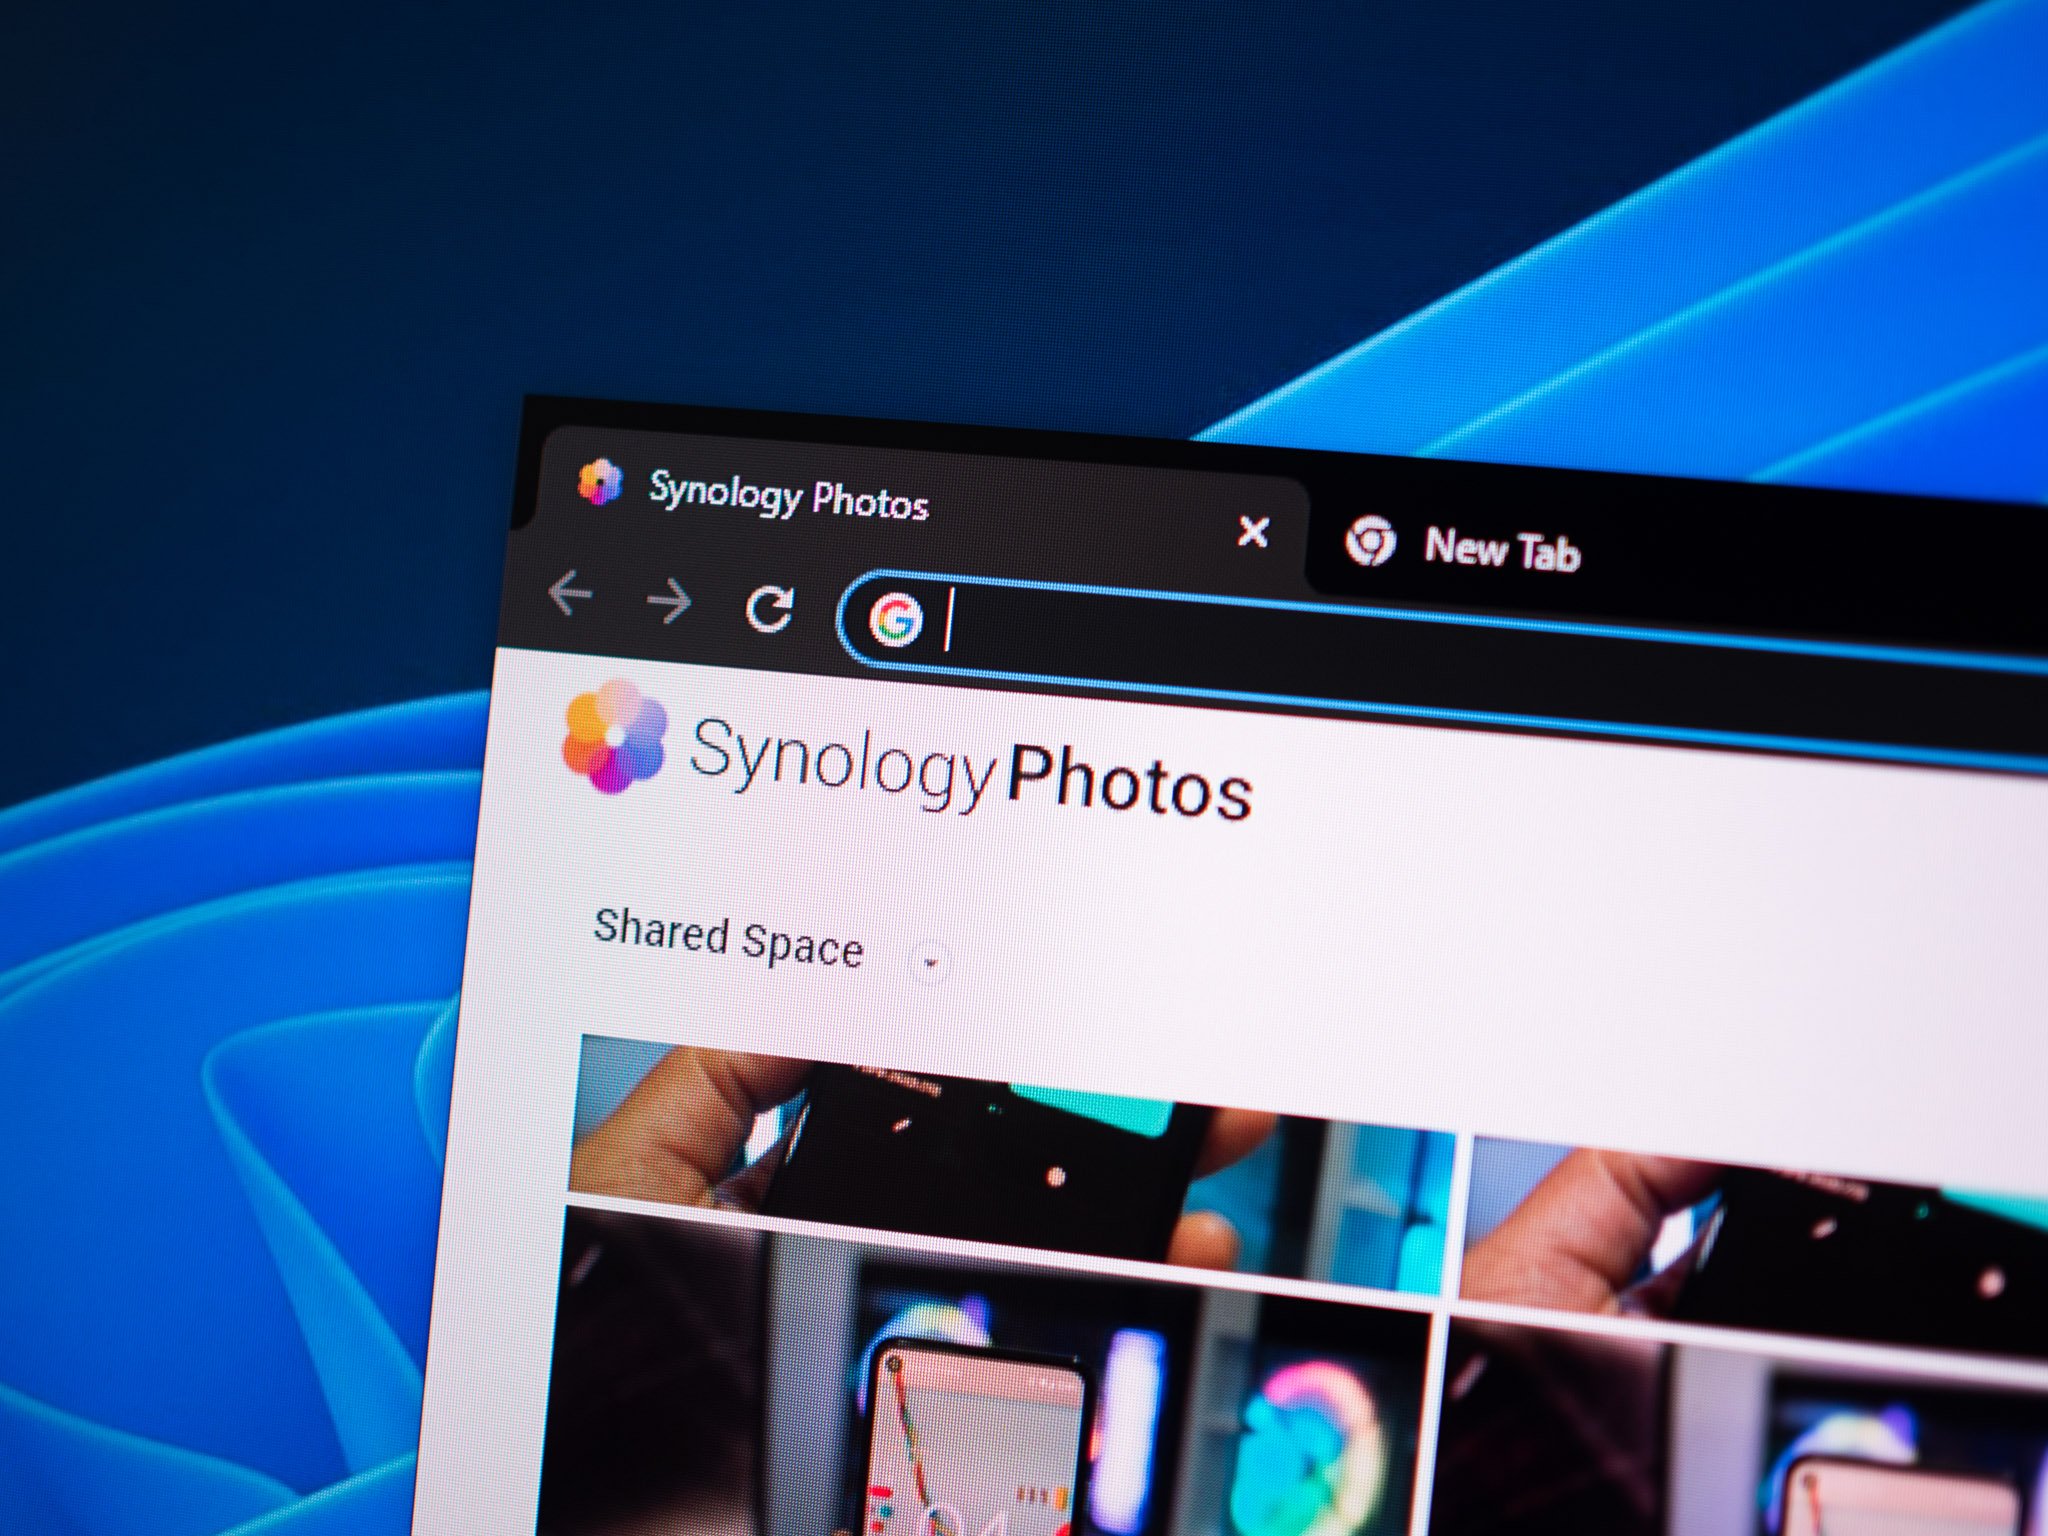 How to transfer from Google Photos to Synology Photos